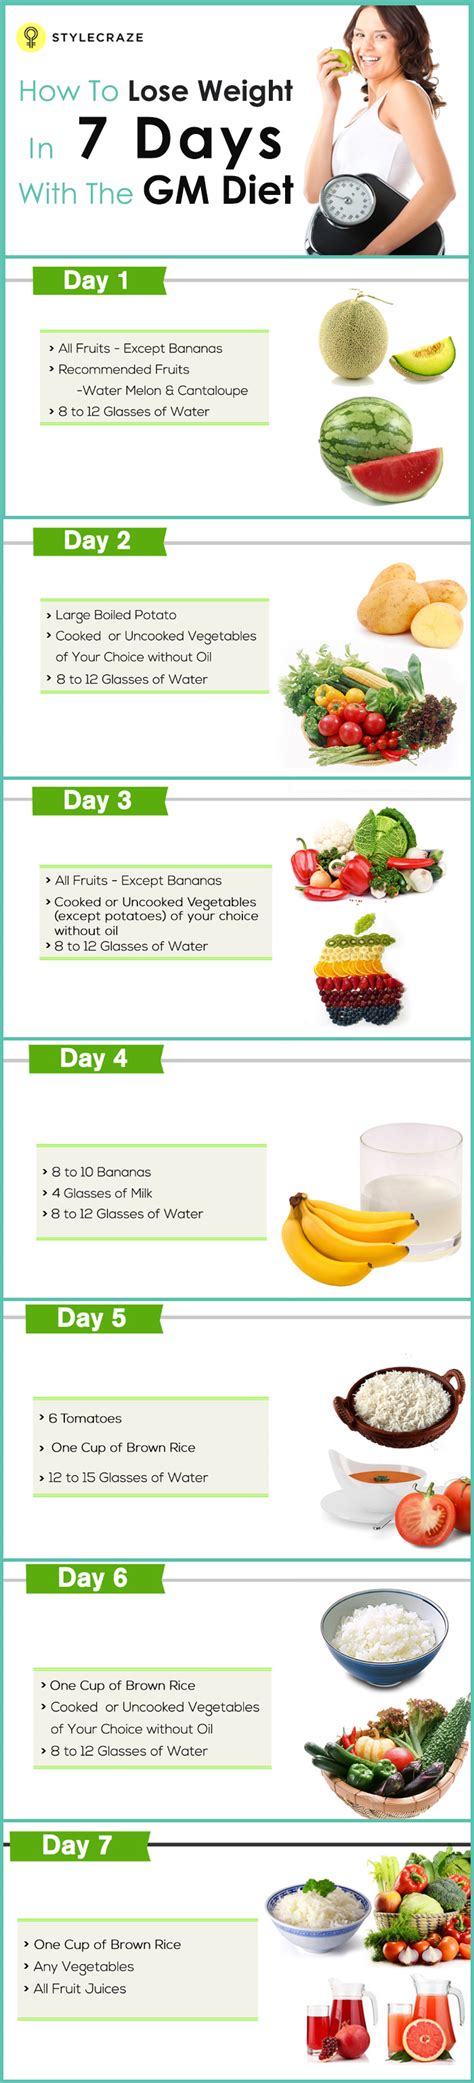 What Is The Fruit Diet Plan Weight Loss